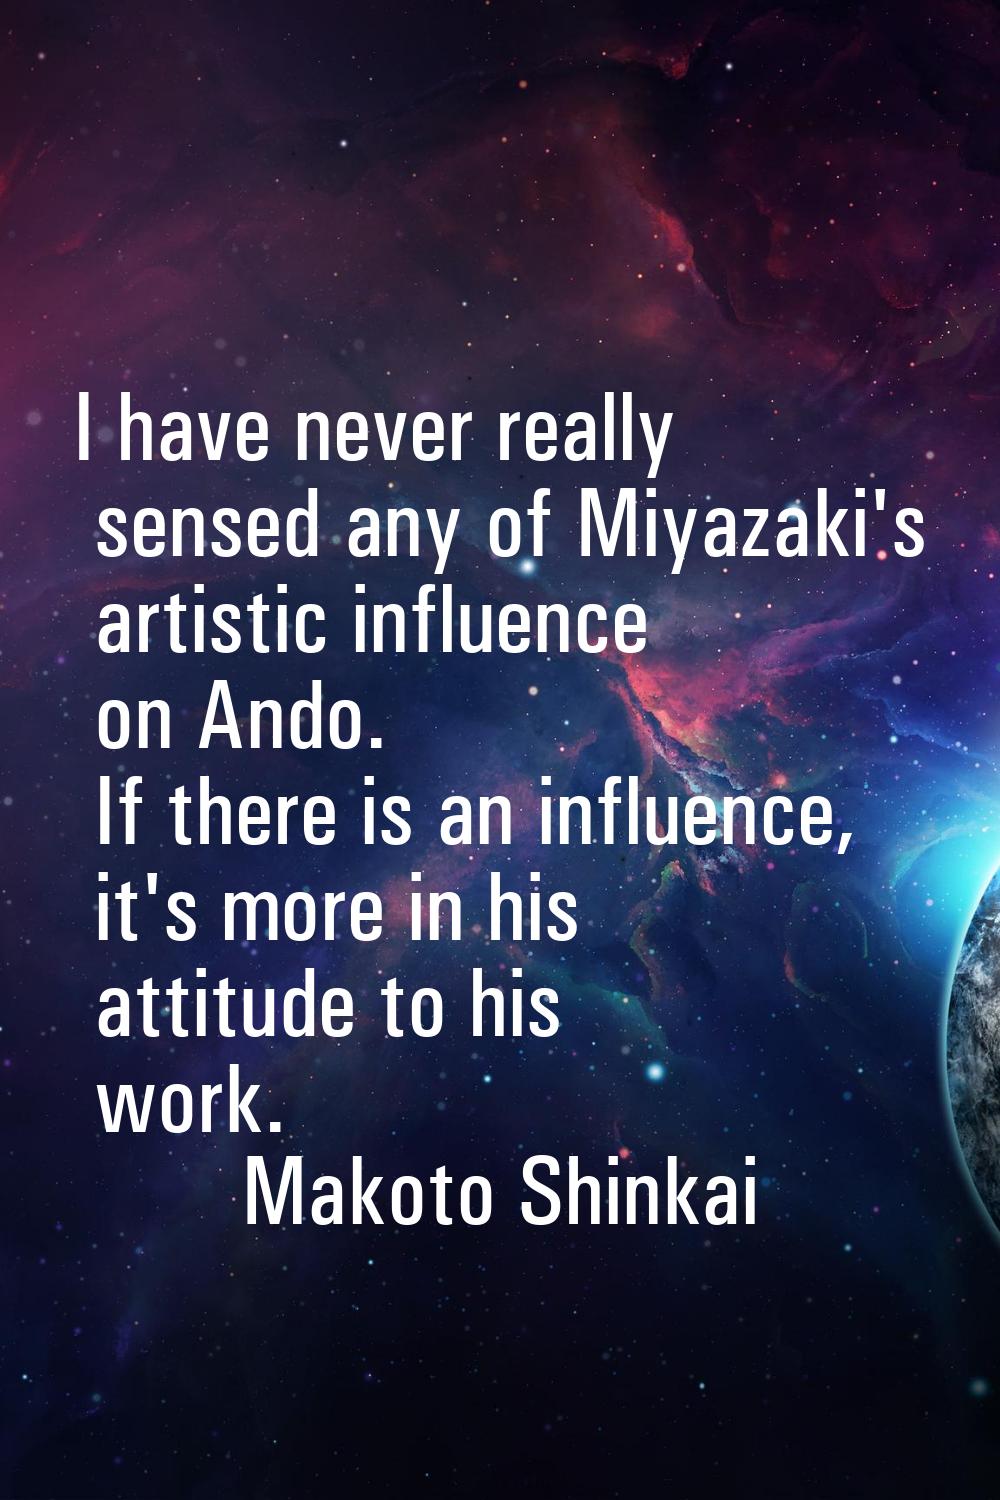 I have never really sensed any of Miyazaki's artistic influence on Ando. If there is an influence, 